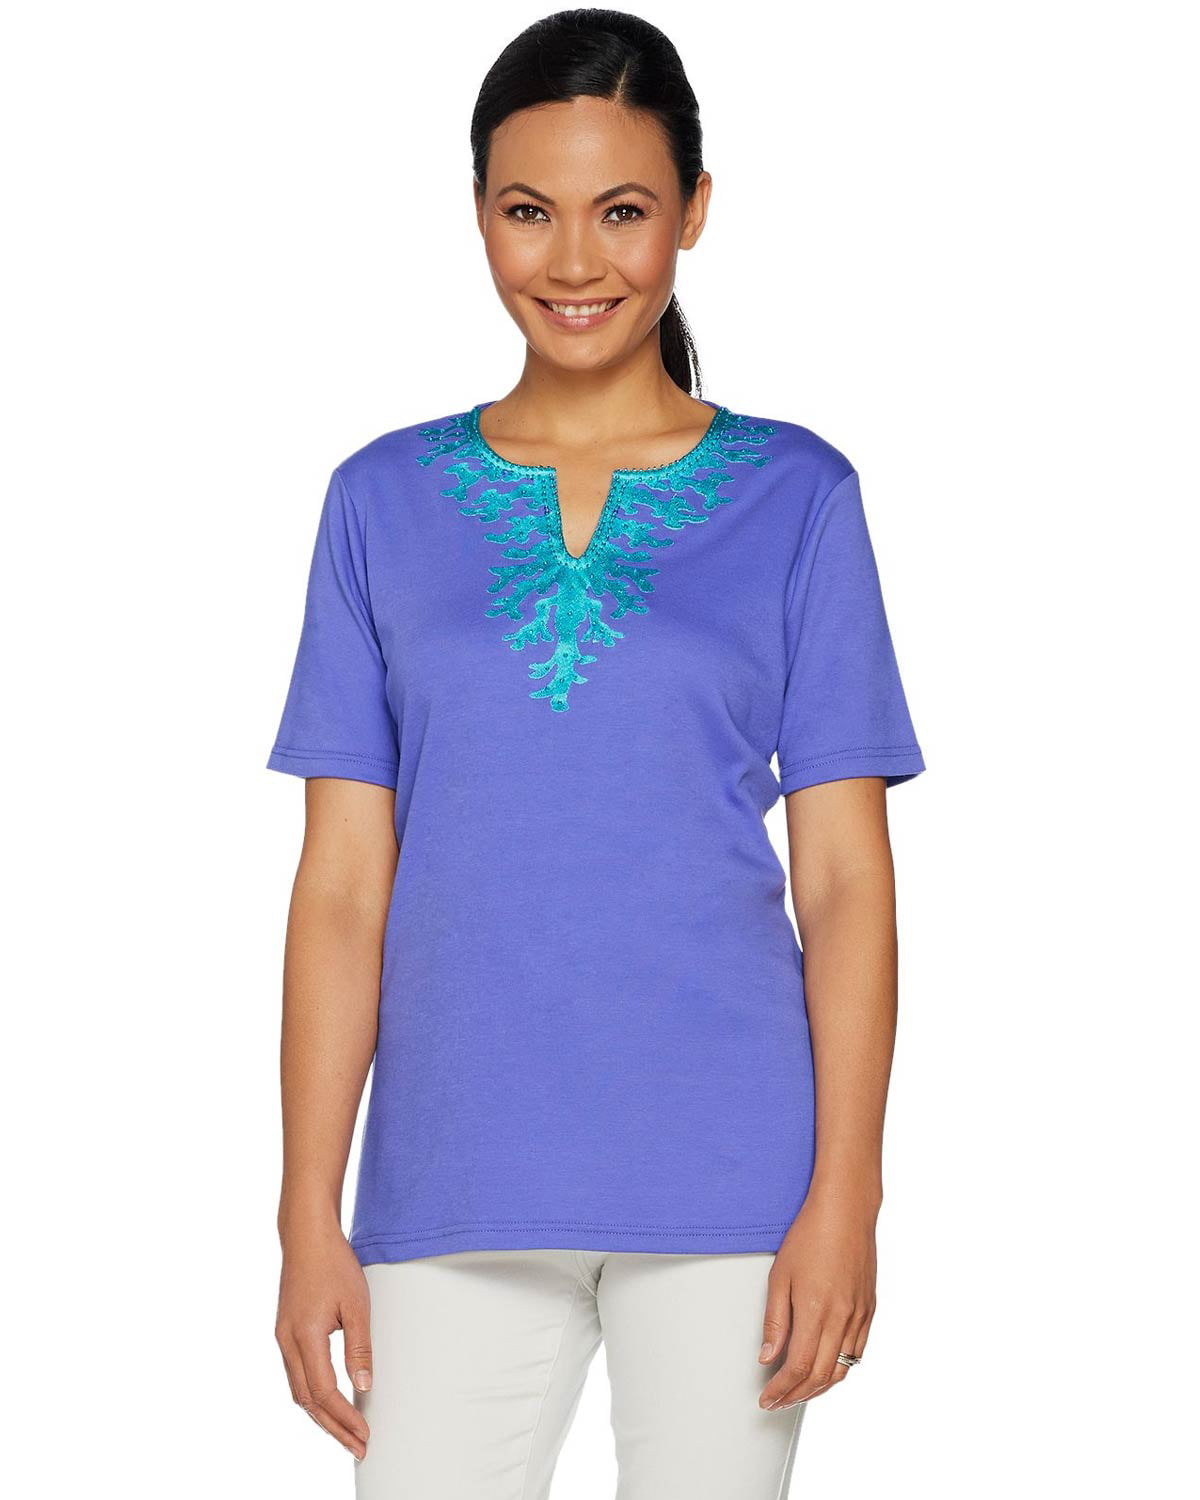 Quacker Factory - Quacker Factory Womens Short Sleeve Coral Embroidered ...